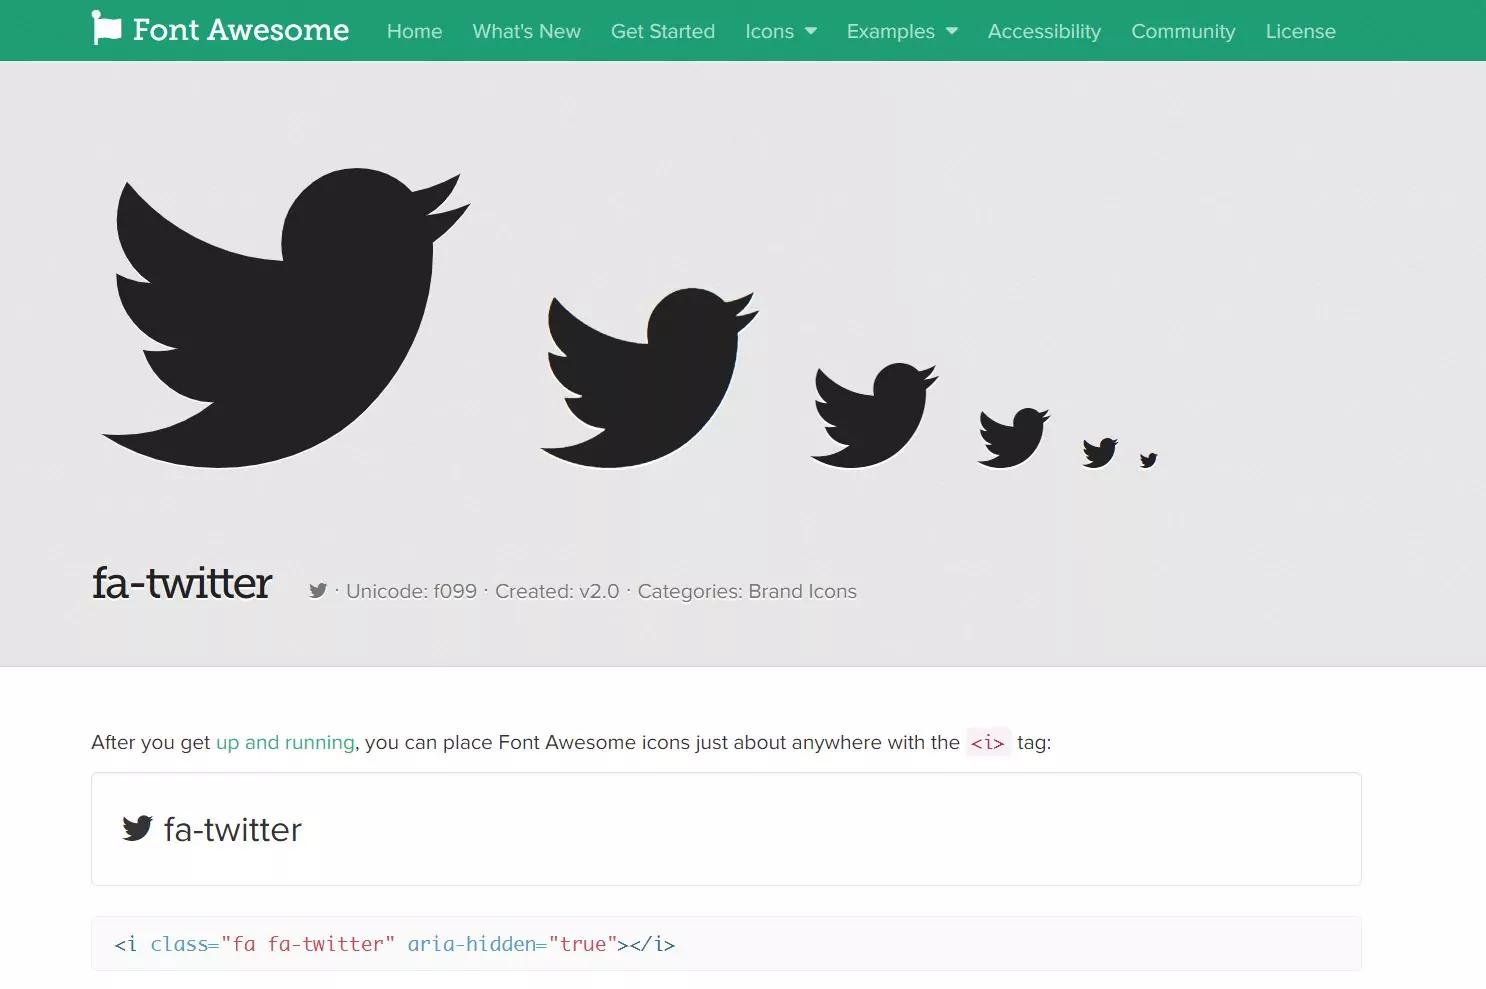 Font Awesome Twitter example